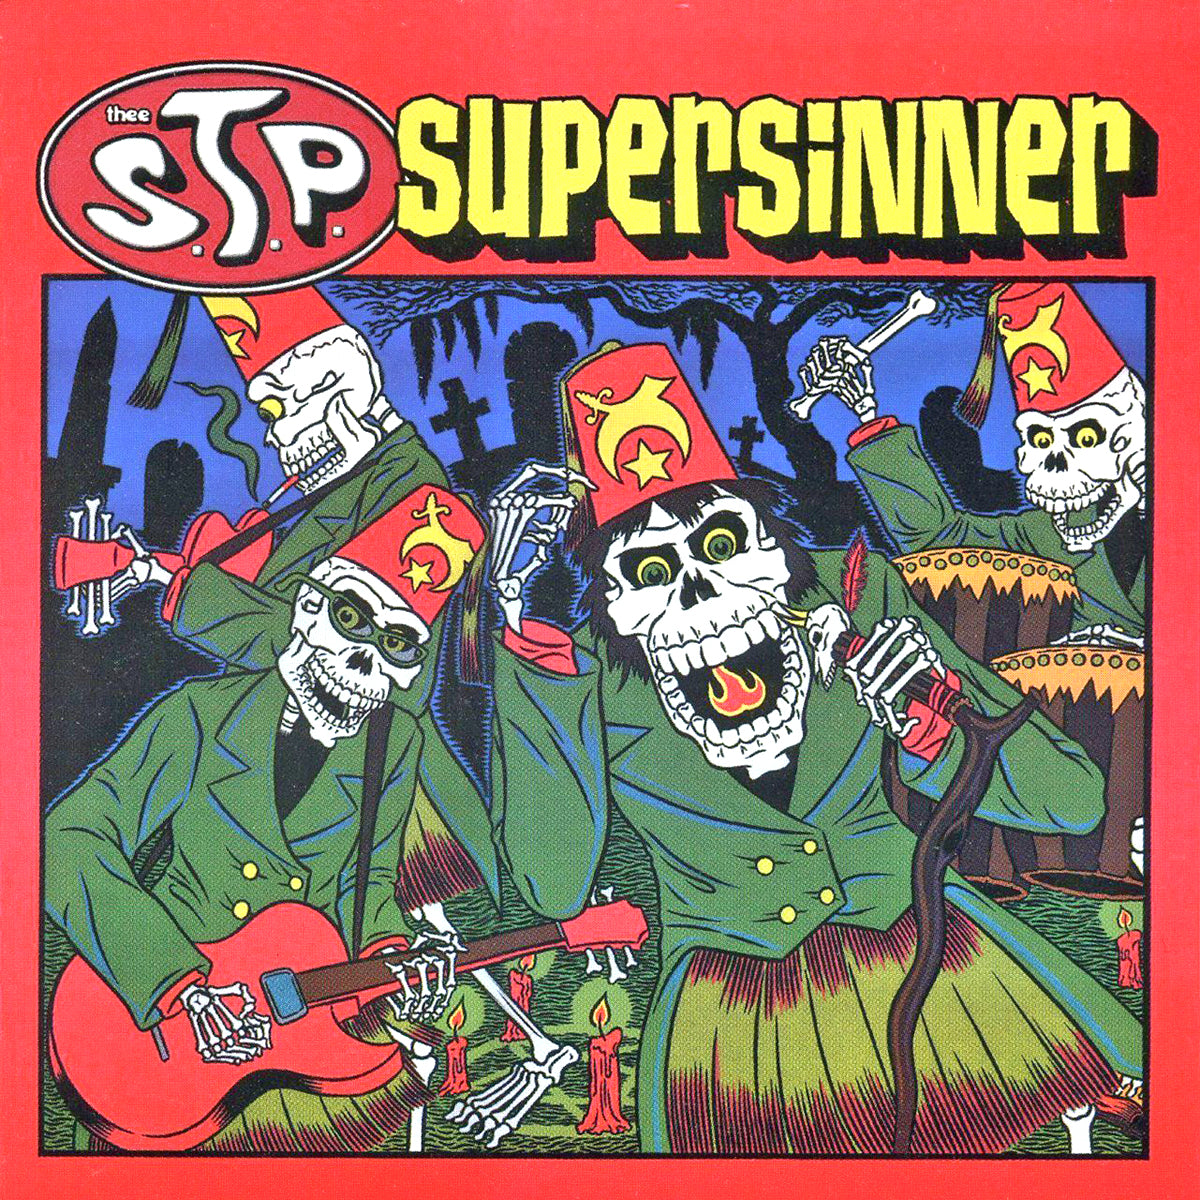 Thee S.T.P. - Supersinner CD ~REISSUE WITH 28 TRACKS!